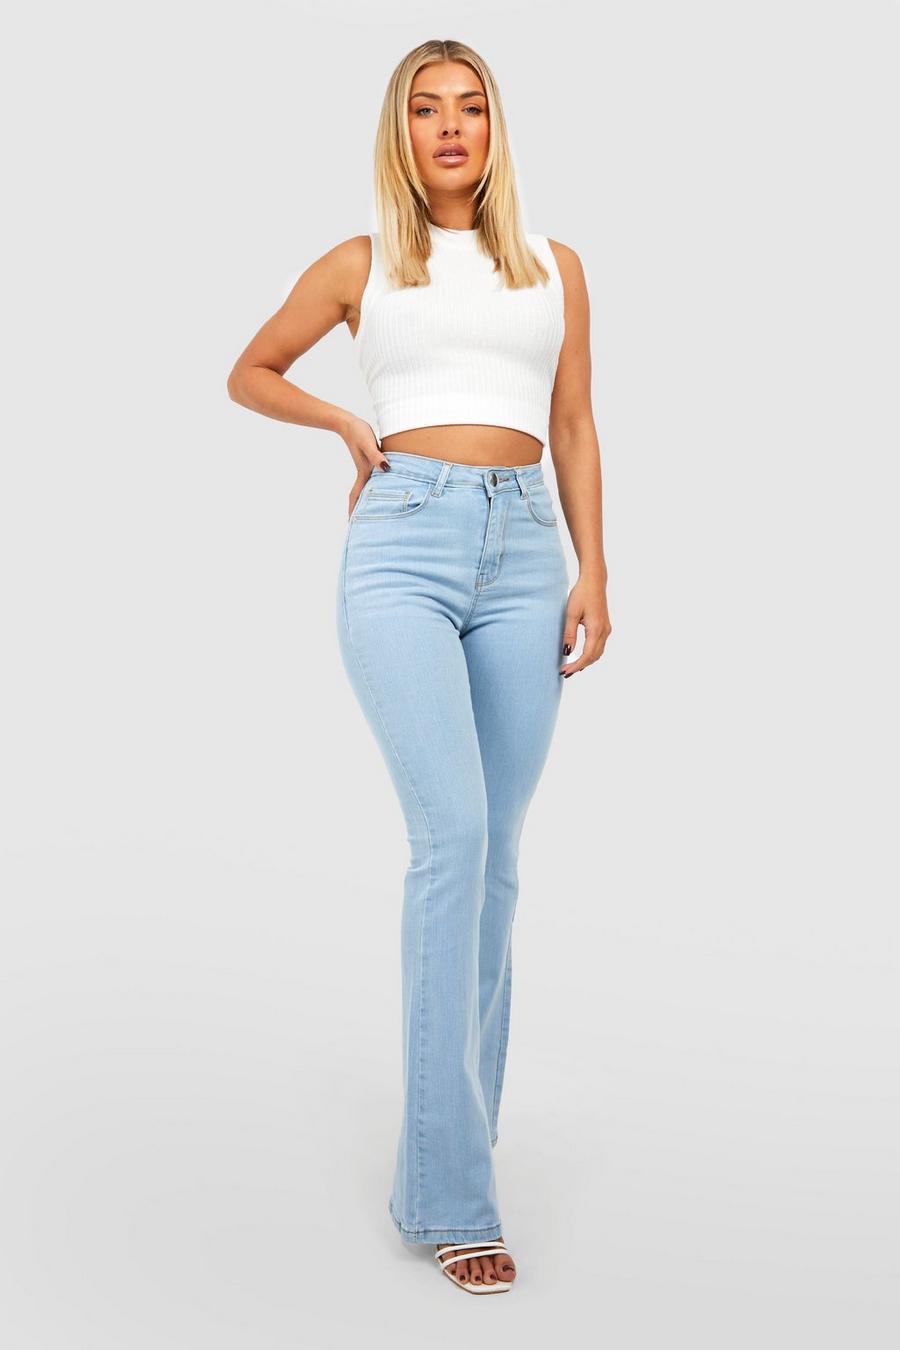 Women's Flare Jeans - Flare Fit Bell Bottom Jeans